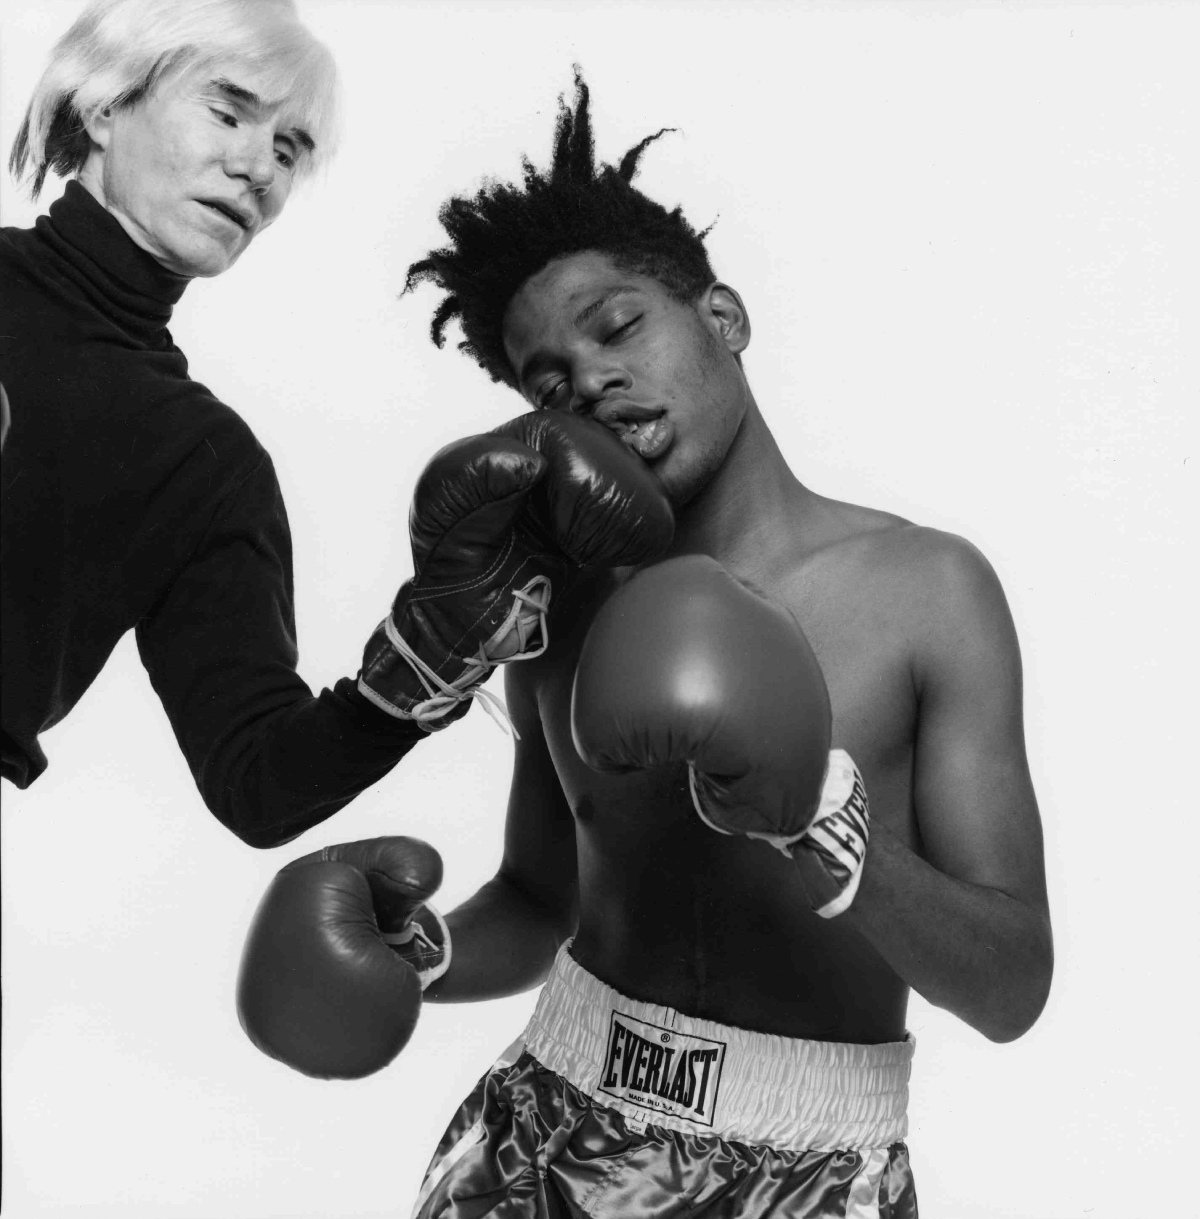 Andy Warhol and Jean-Michel Basquiat